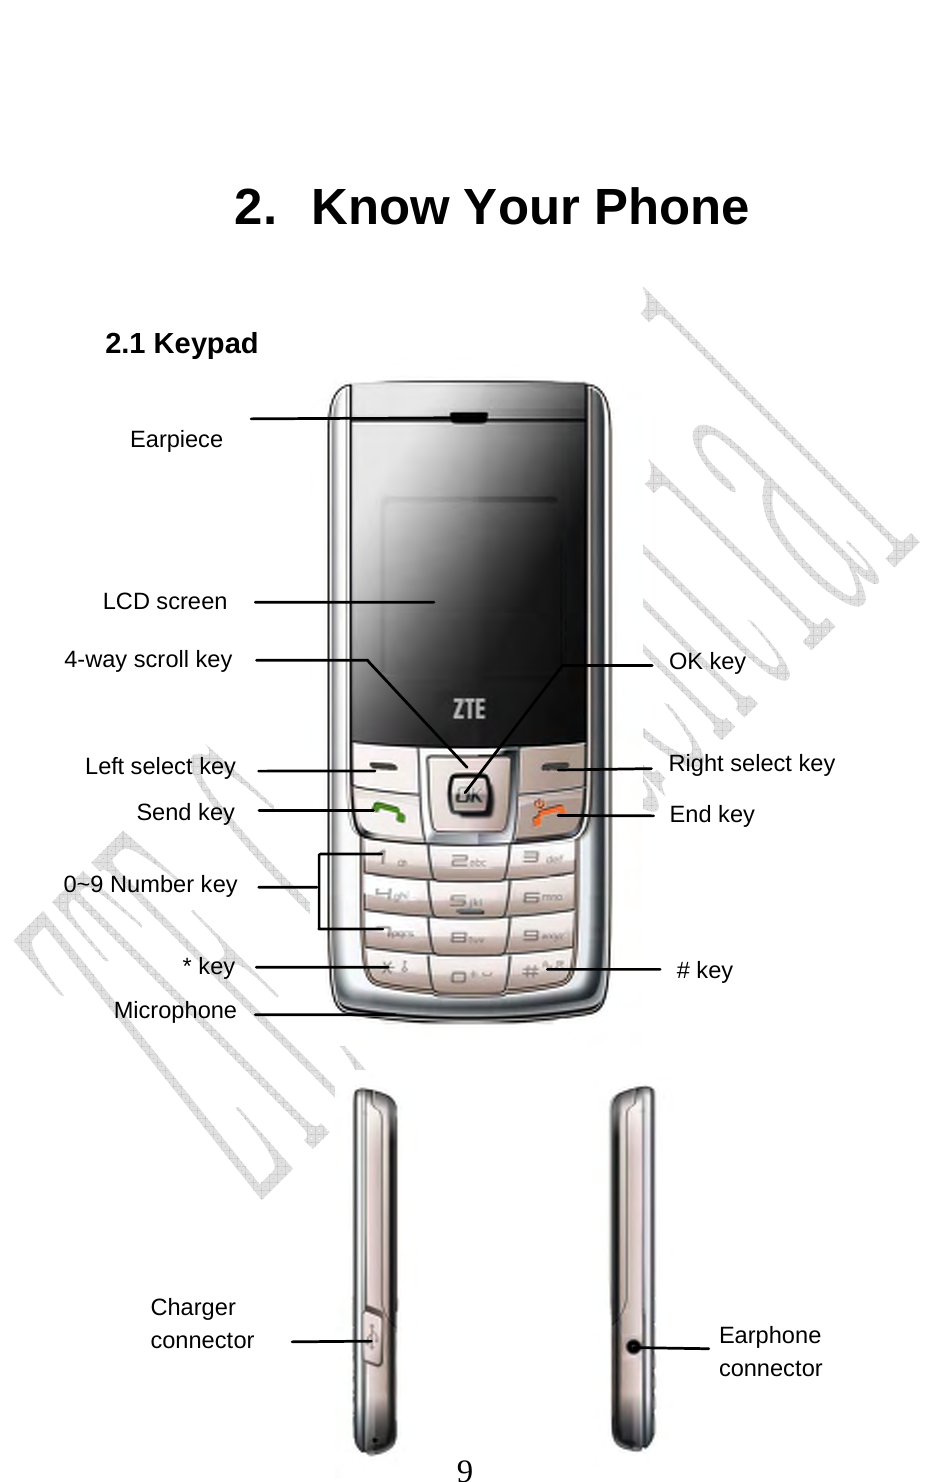                              9 2. Know Your Phone 2.1 Keypad                    Send key End key Earpiece LCD screen 4-way scroll key Left select key 0~9 Number key Right select key  * key  #key OK key Microphone Charger connector Earphone connector 